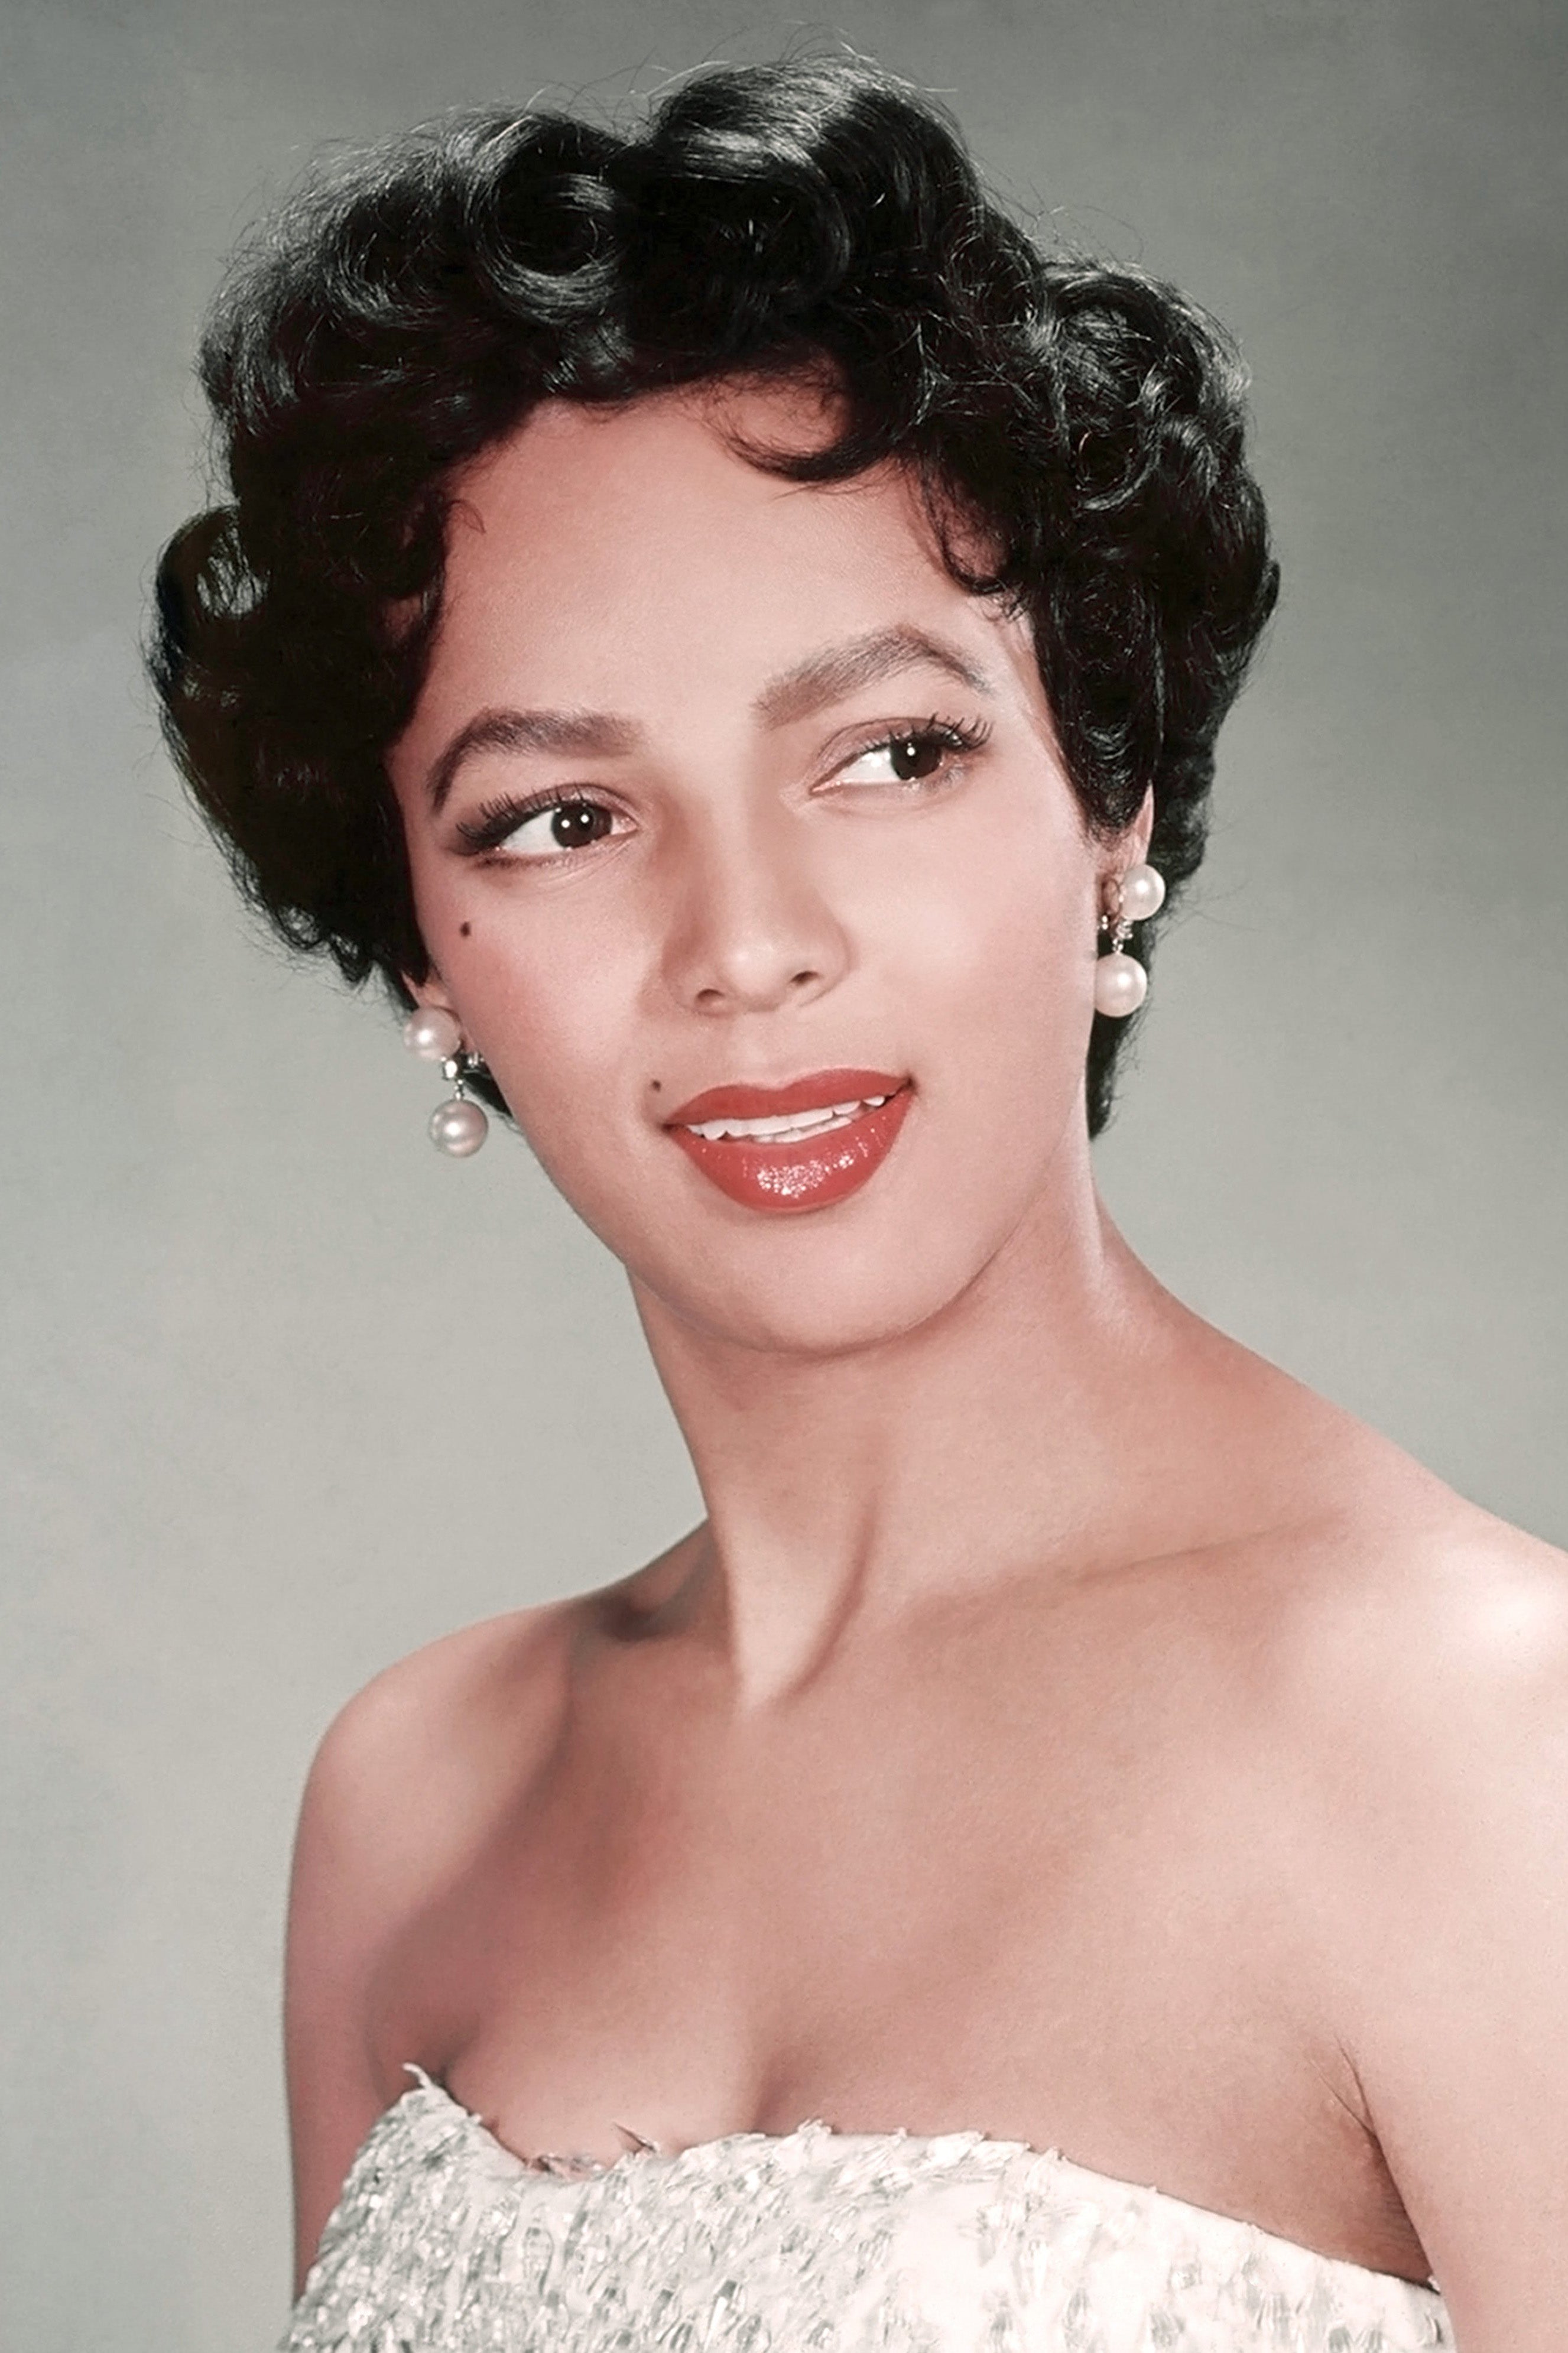 17 Iconic Vintage Hairstyles We're Still Obsessed With Today
